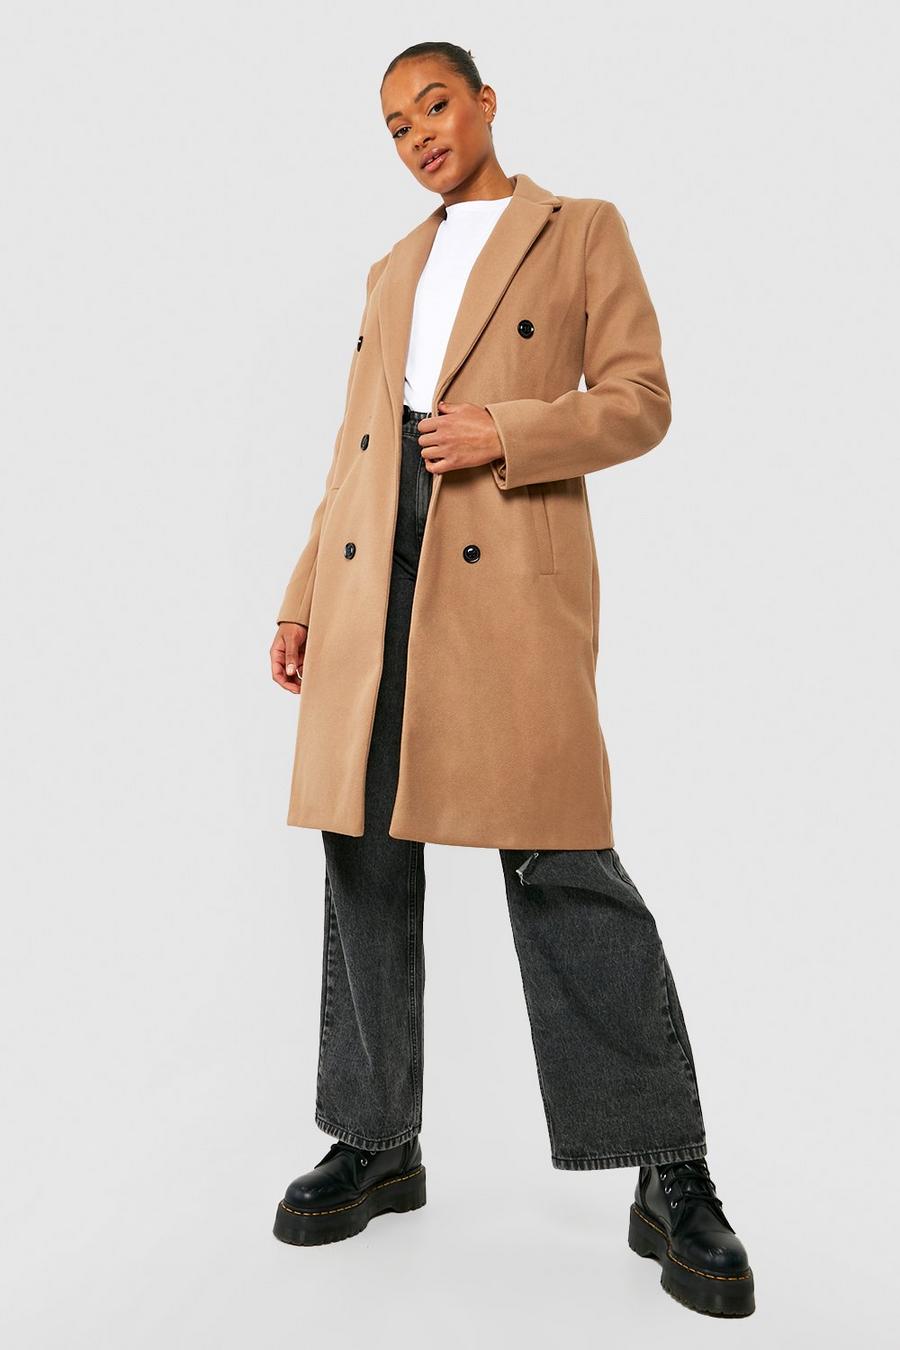 boohoo Women's Double Breasted Tailored Coat